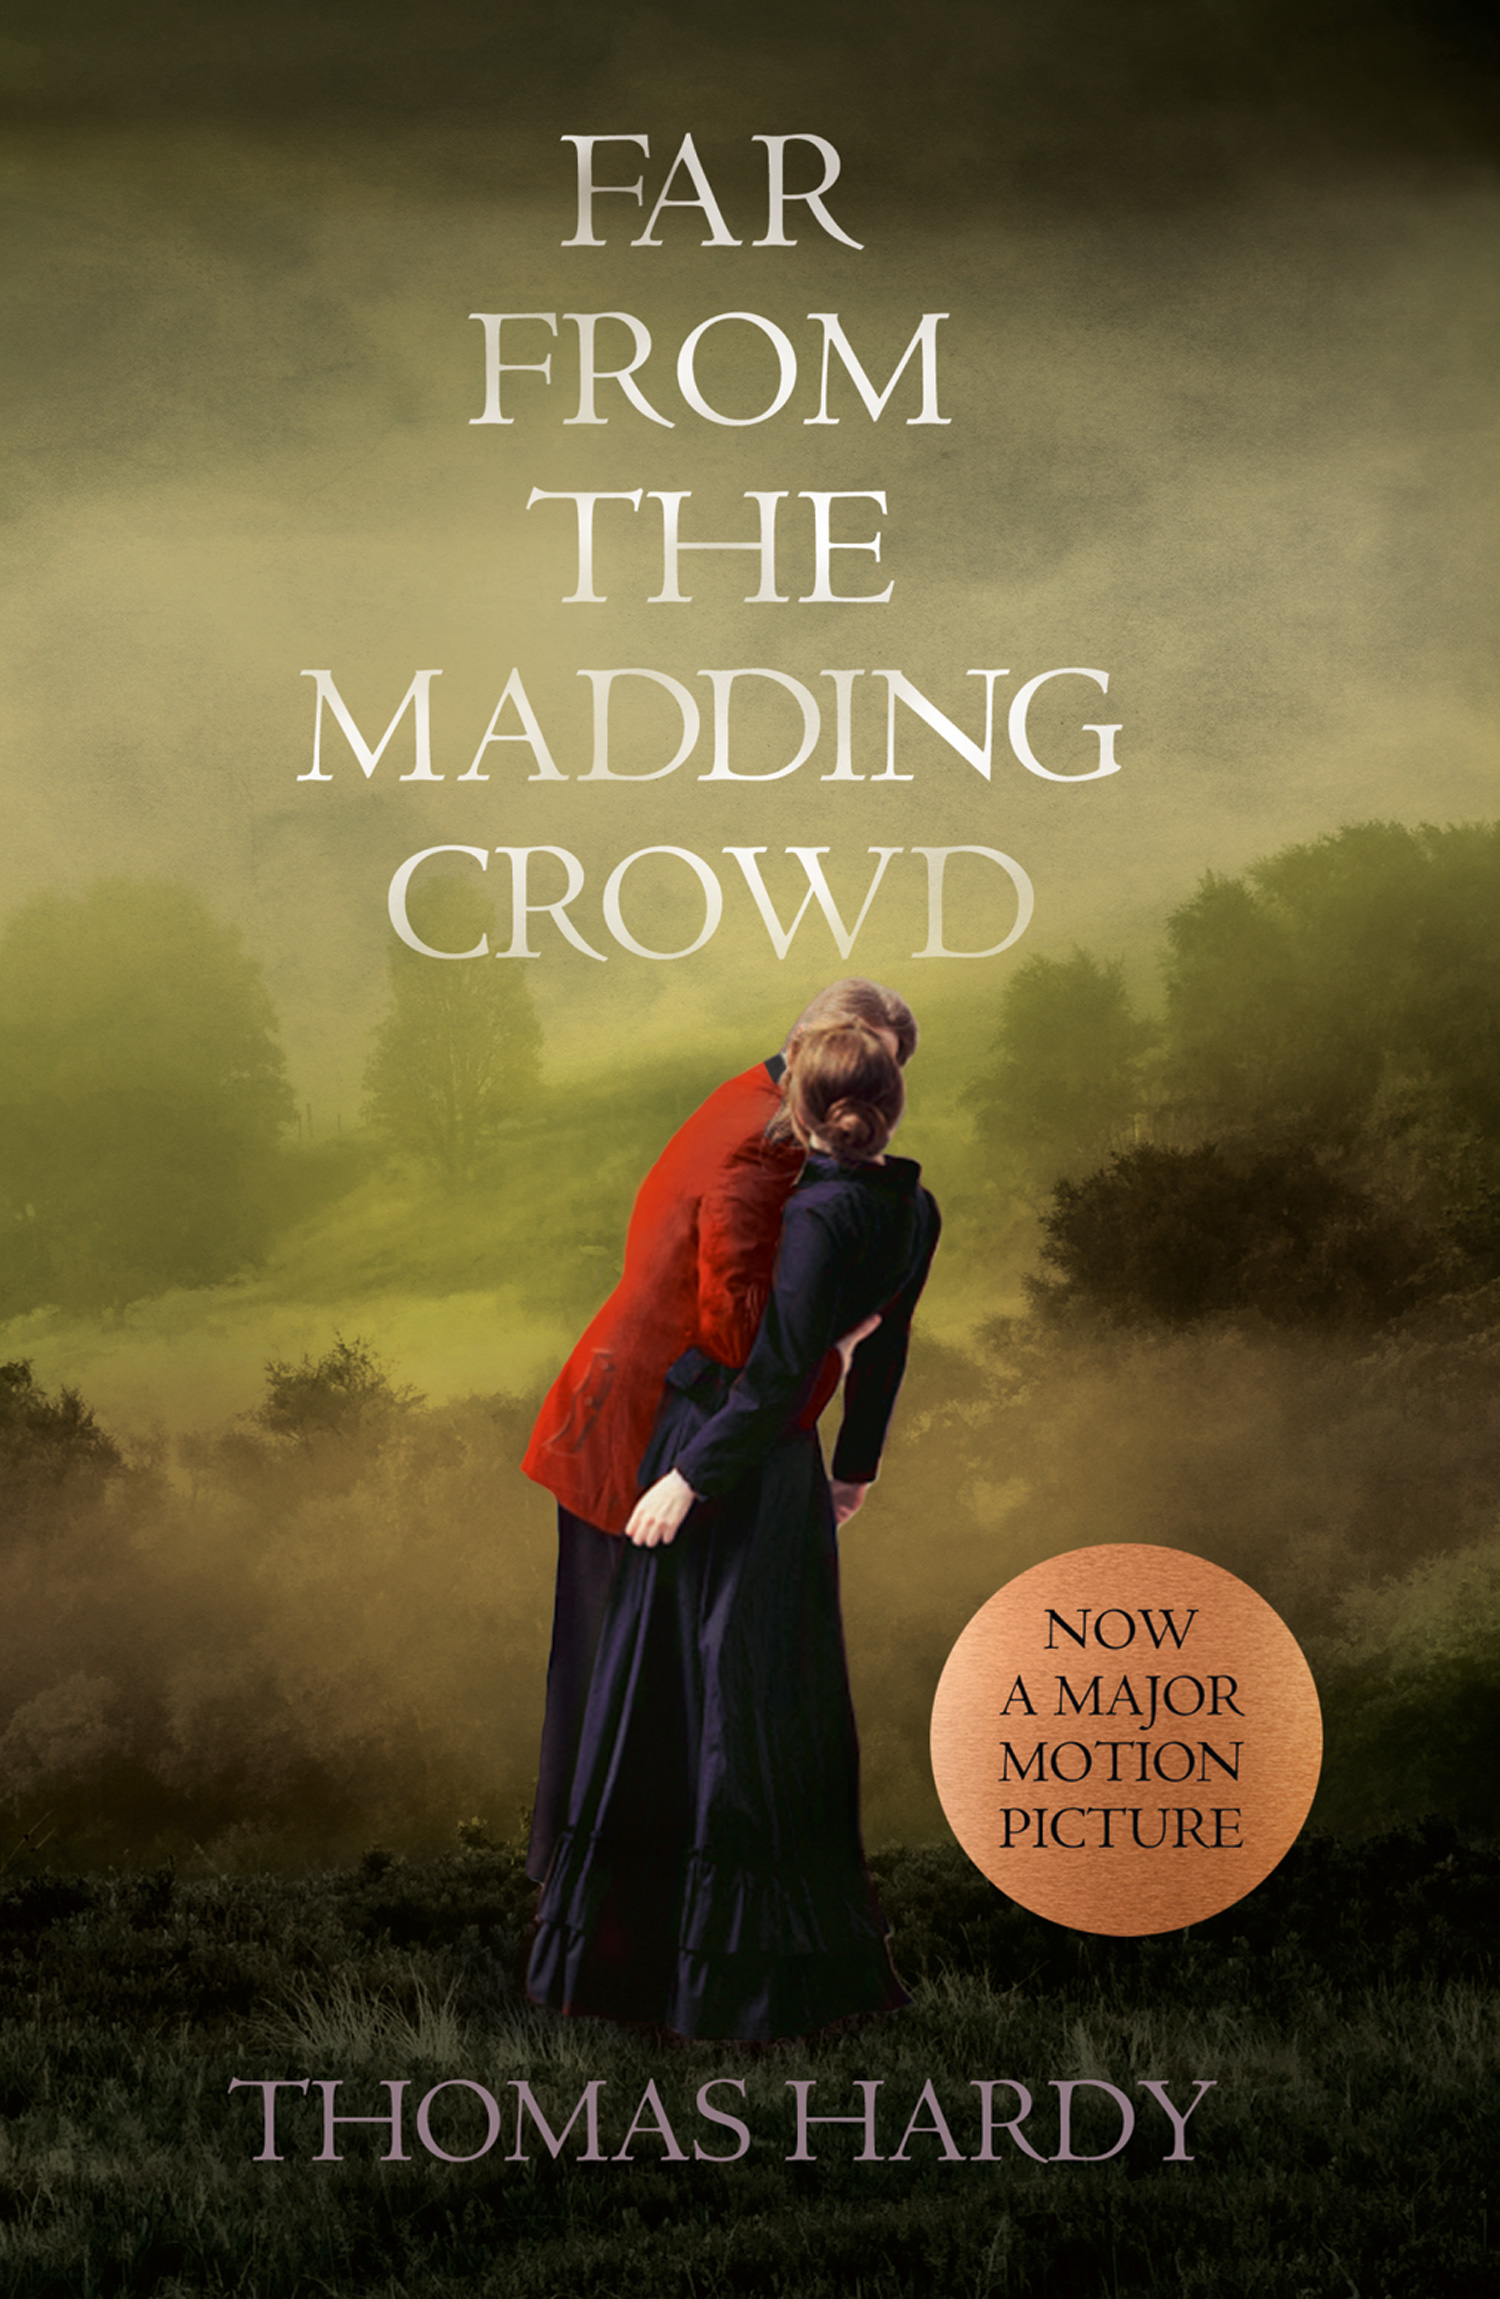 Far from the Madding crowd book. Far from the Madding crowd книга. Харди читать